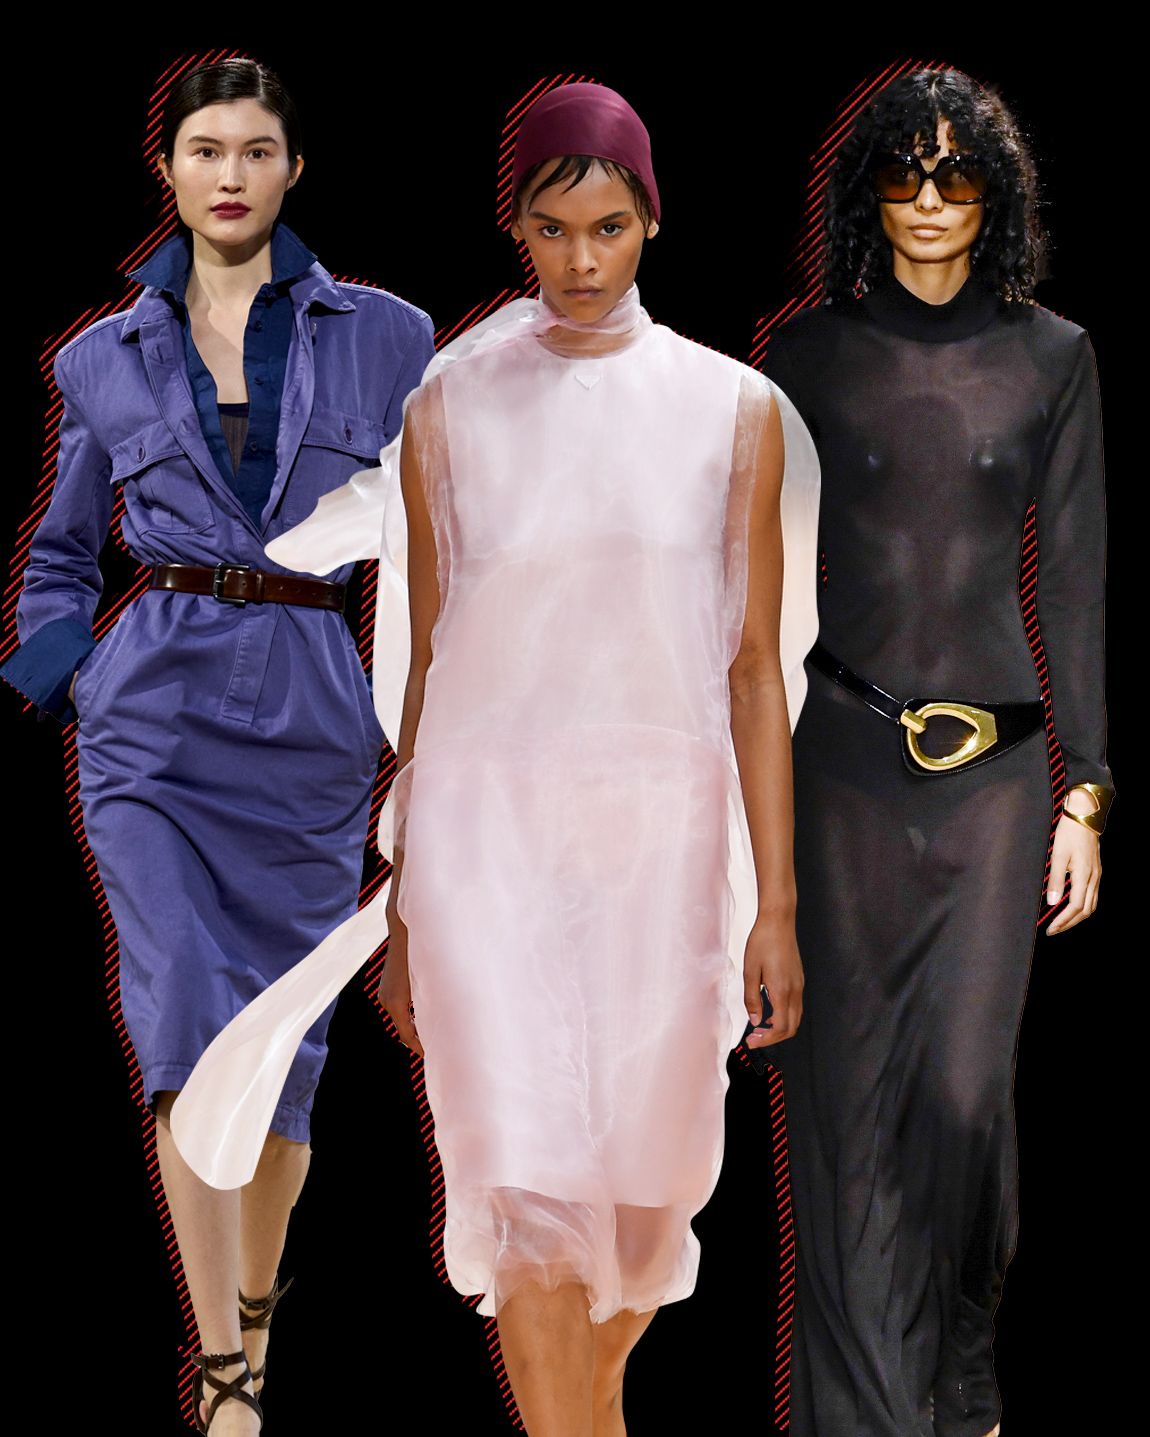 Tom Ford Spring 2020 Ready-to-Wear collection, runway looks, beauty,  models, and reviews.